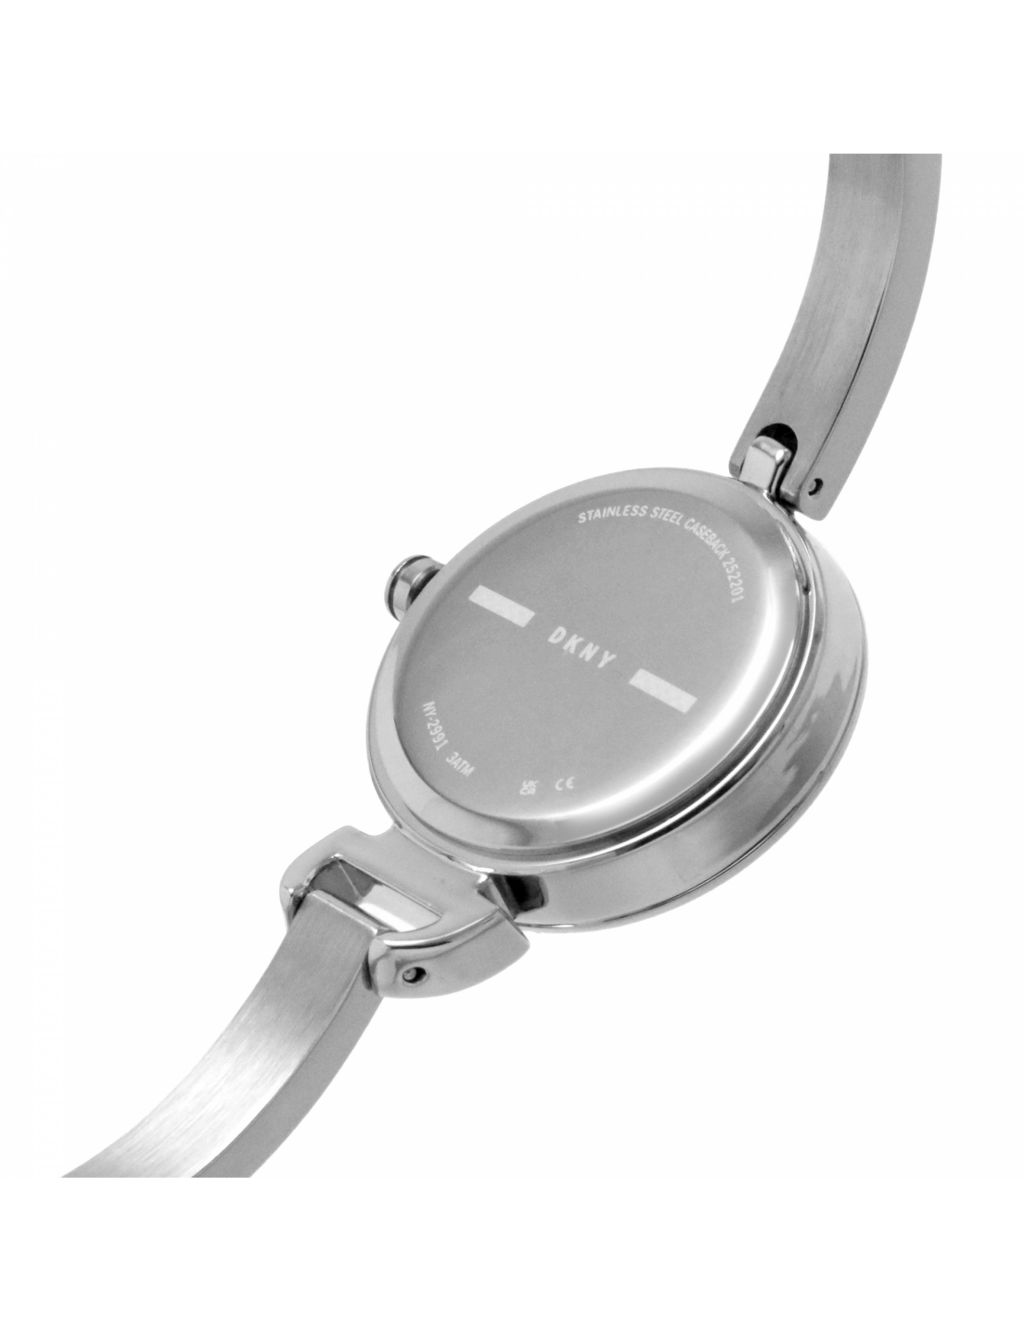 DKNY Uptown Stainless Steel Watch image 10